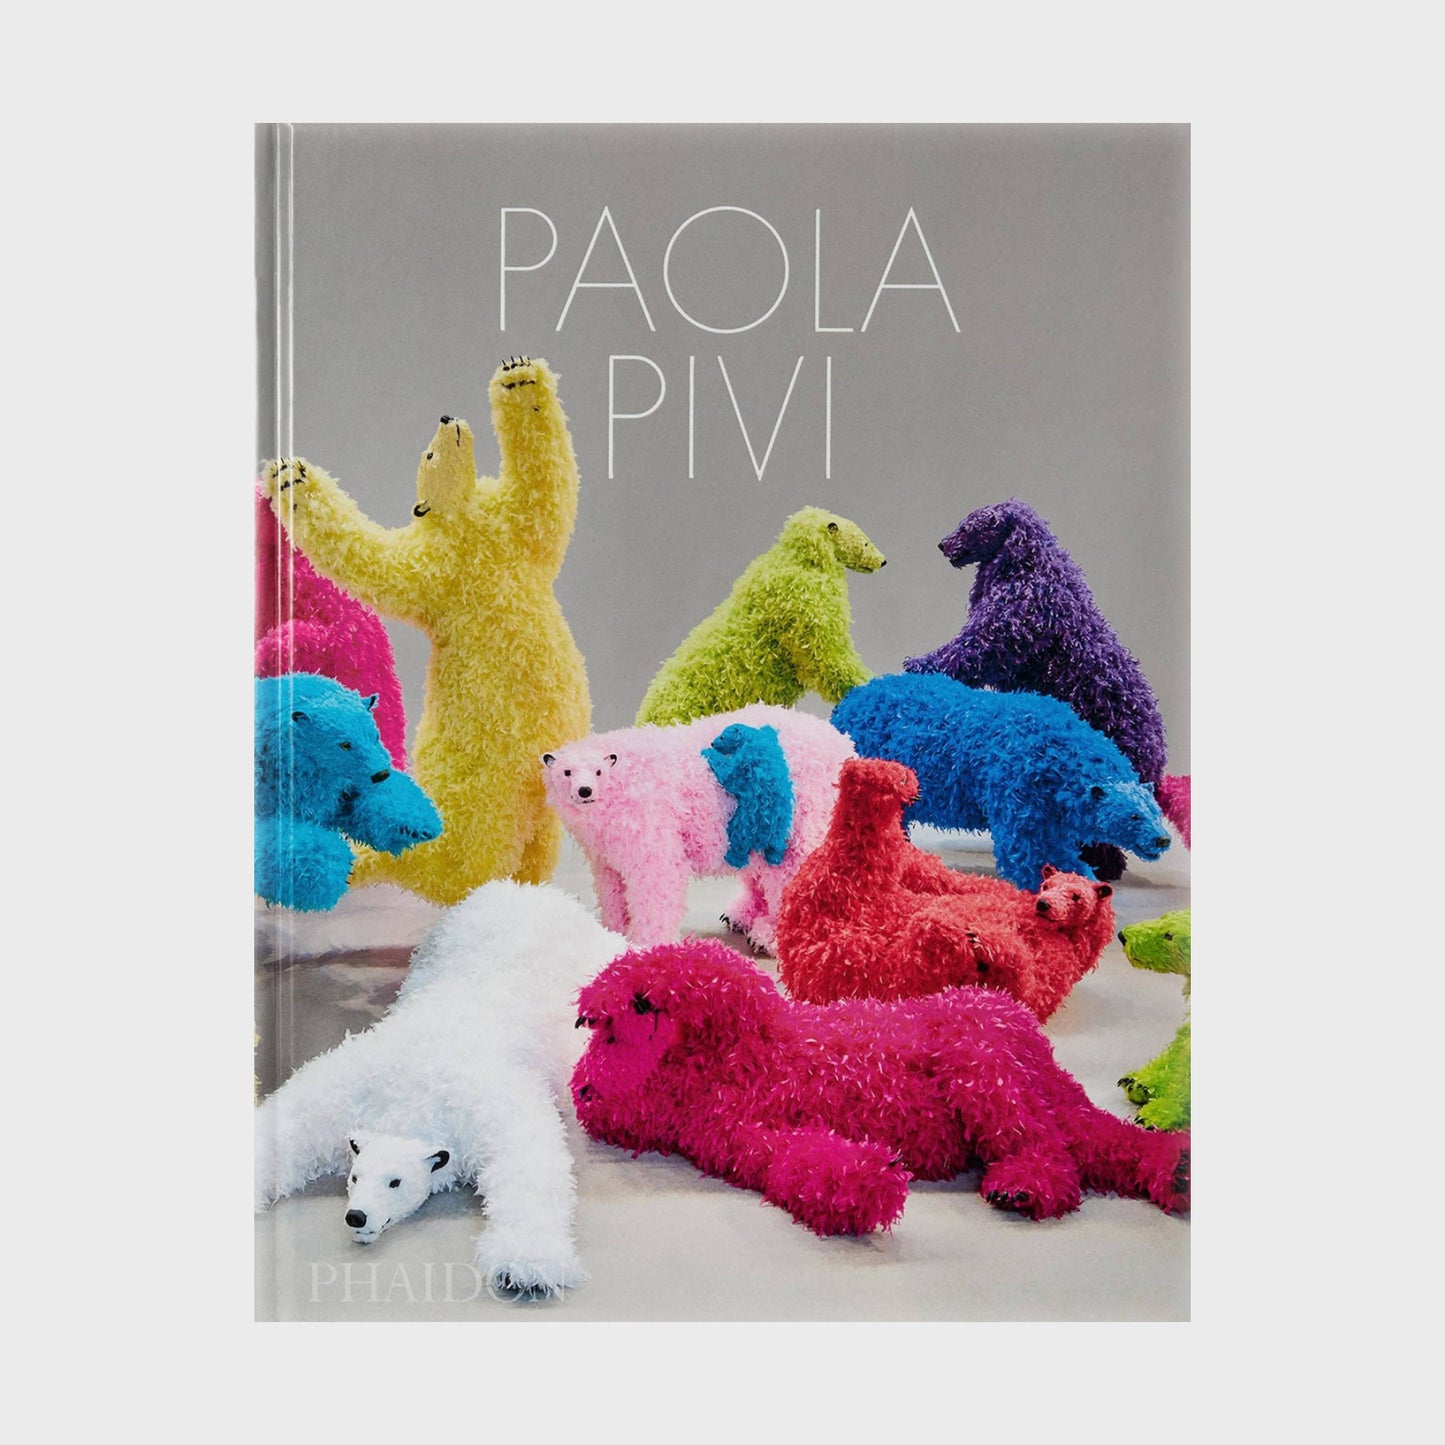 Paola Pivi Hardcover by Justine Ludwig (Editor), Paola Pivi (Artist)